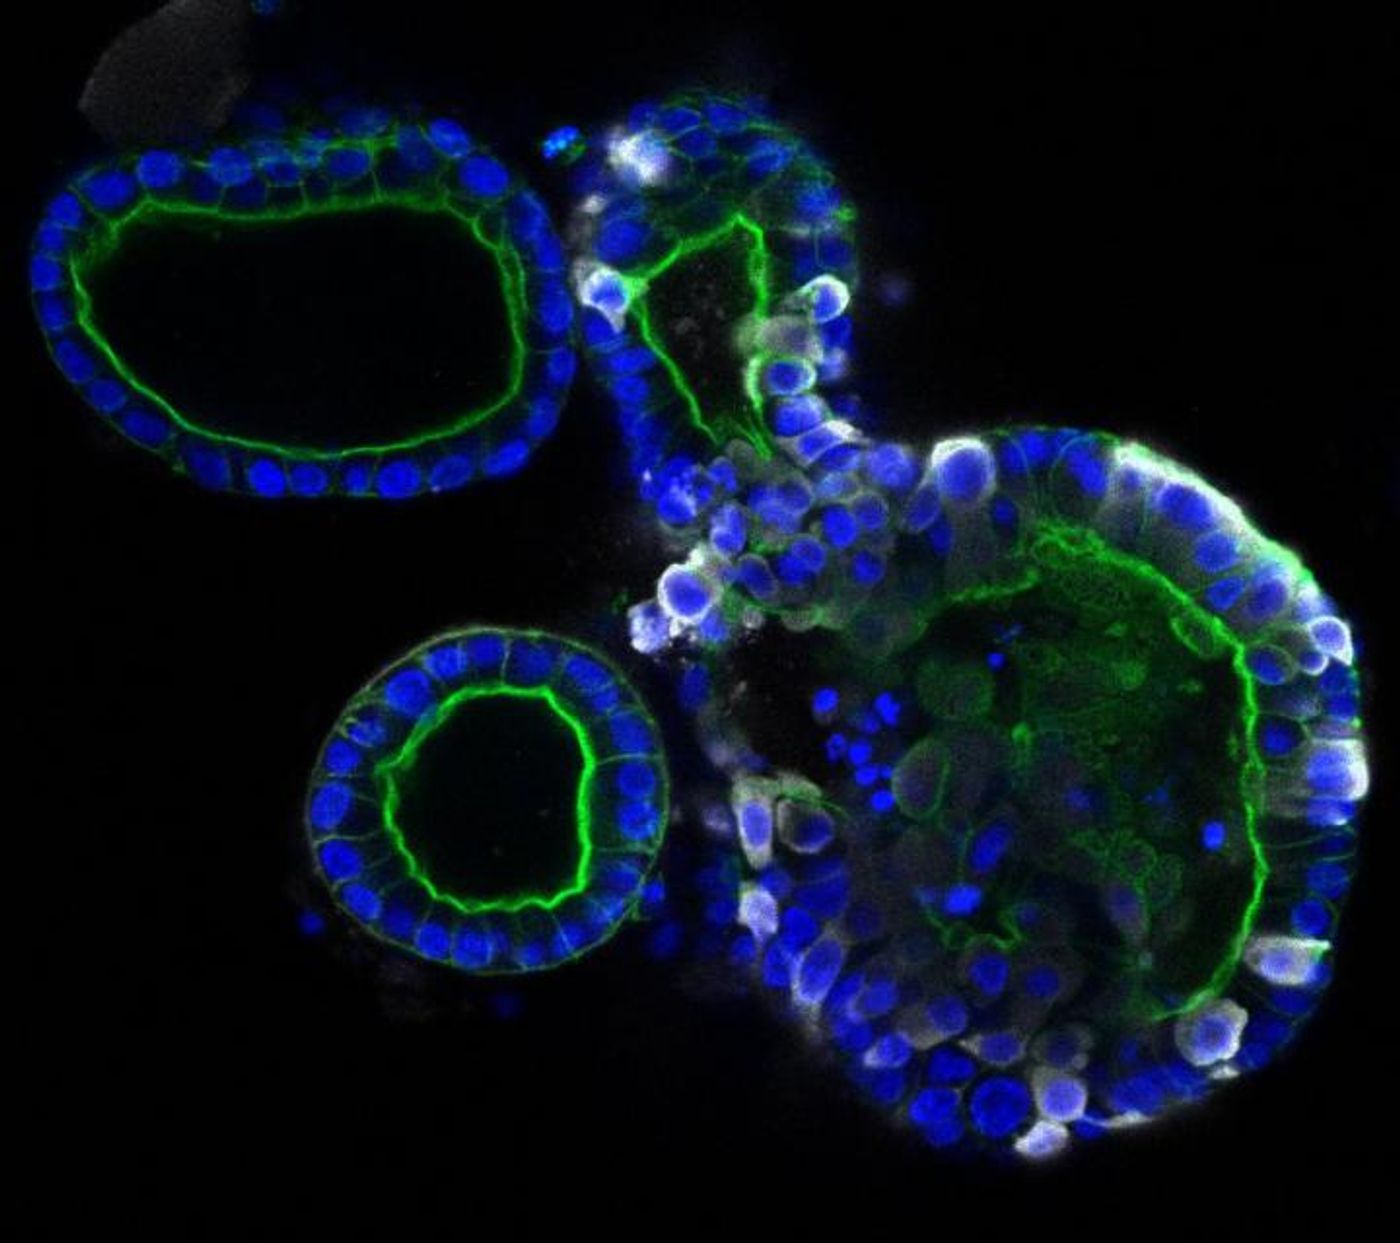 Intestinal organoids, the right one infected with coronavirus SARS-CoV-2. The coronavirus is colored white, the organoids themselves are colored blue and green. / Credit: Joep Beumer, copyright Hubrecht Institue